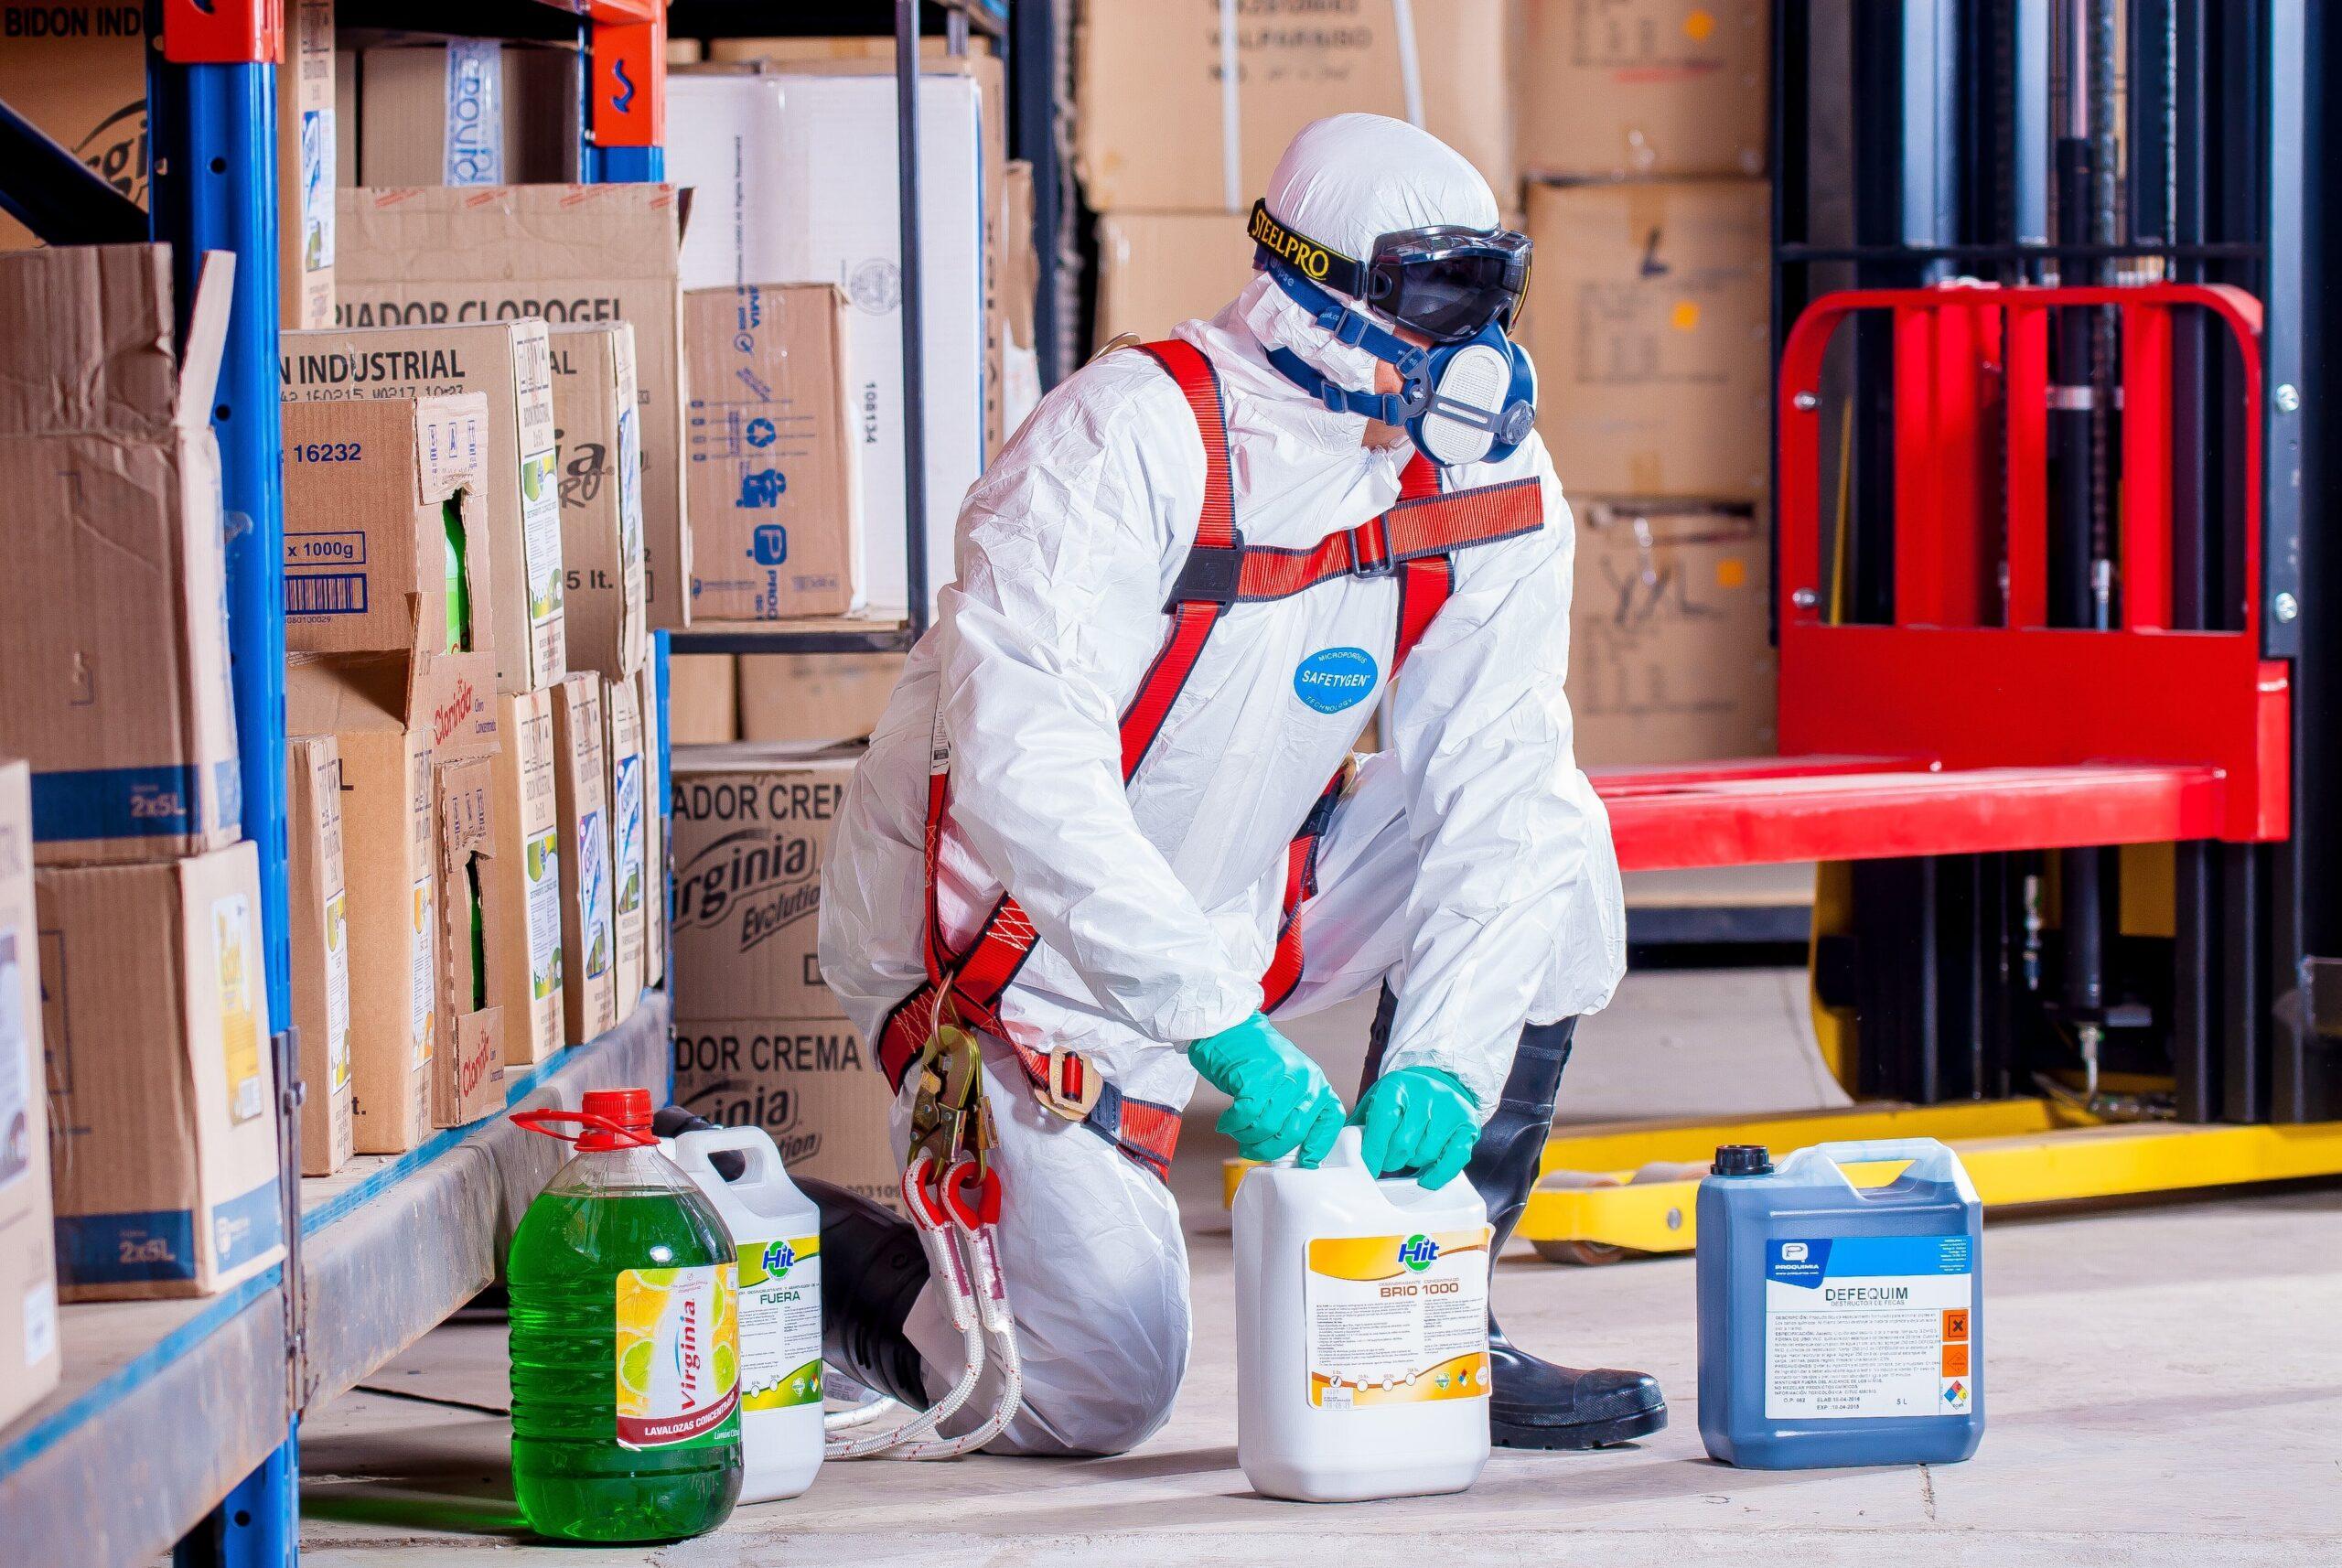 worker disposing chemicals with safety equipment